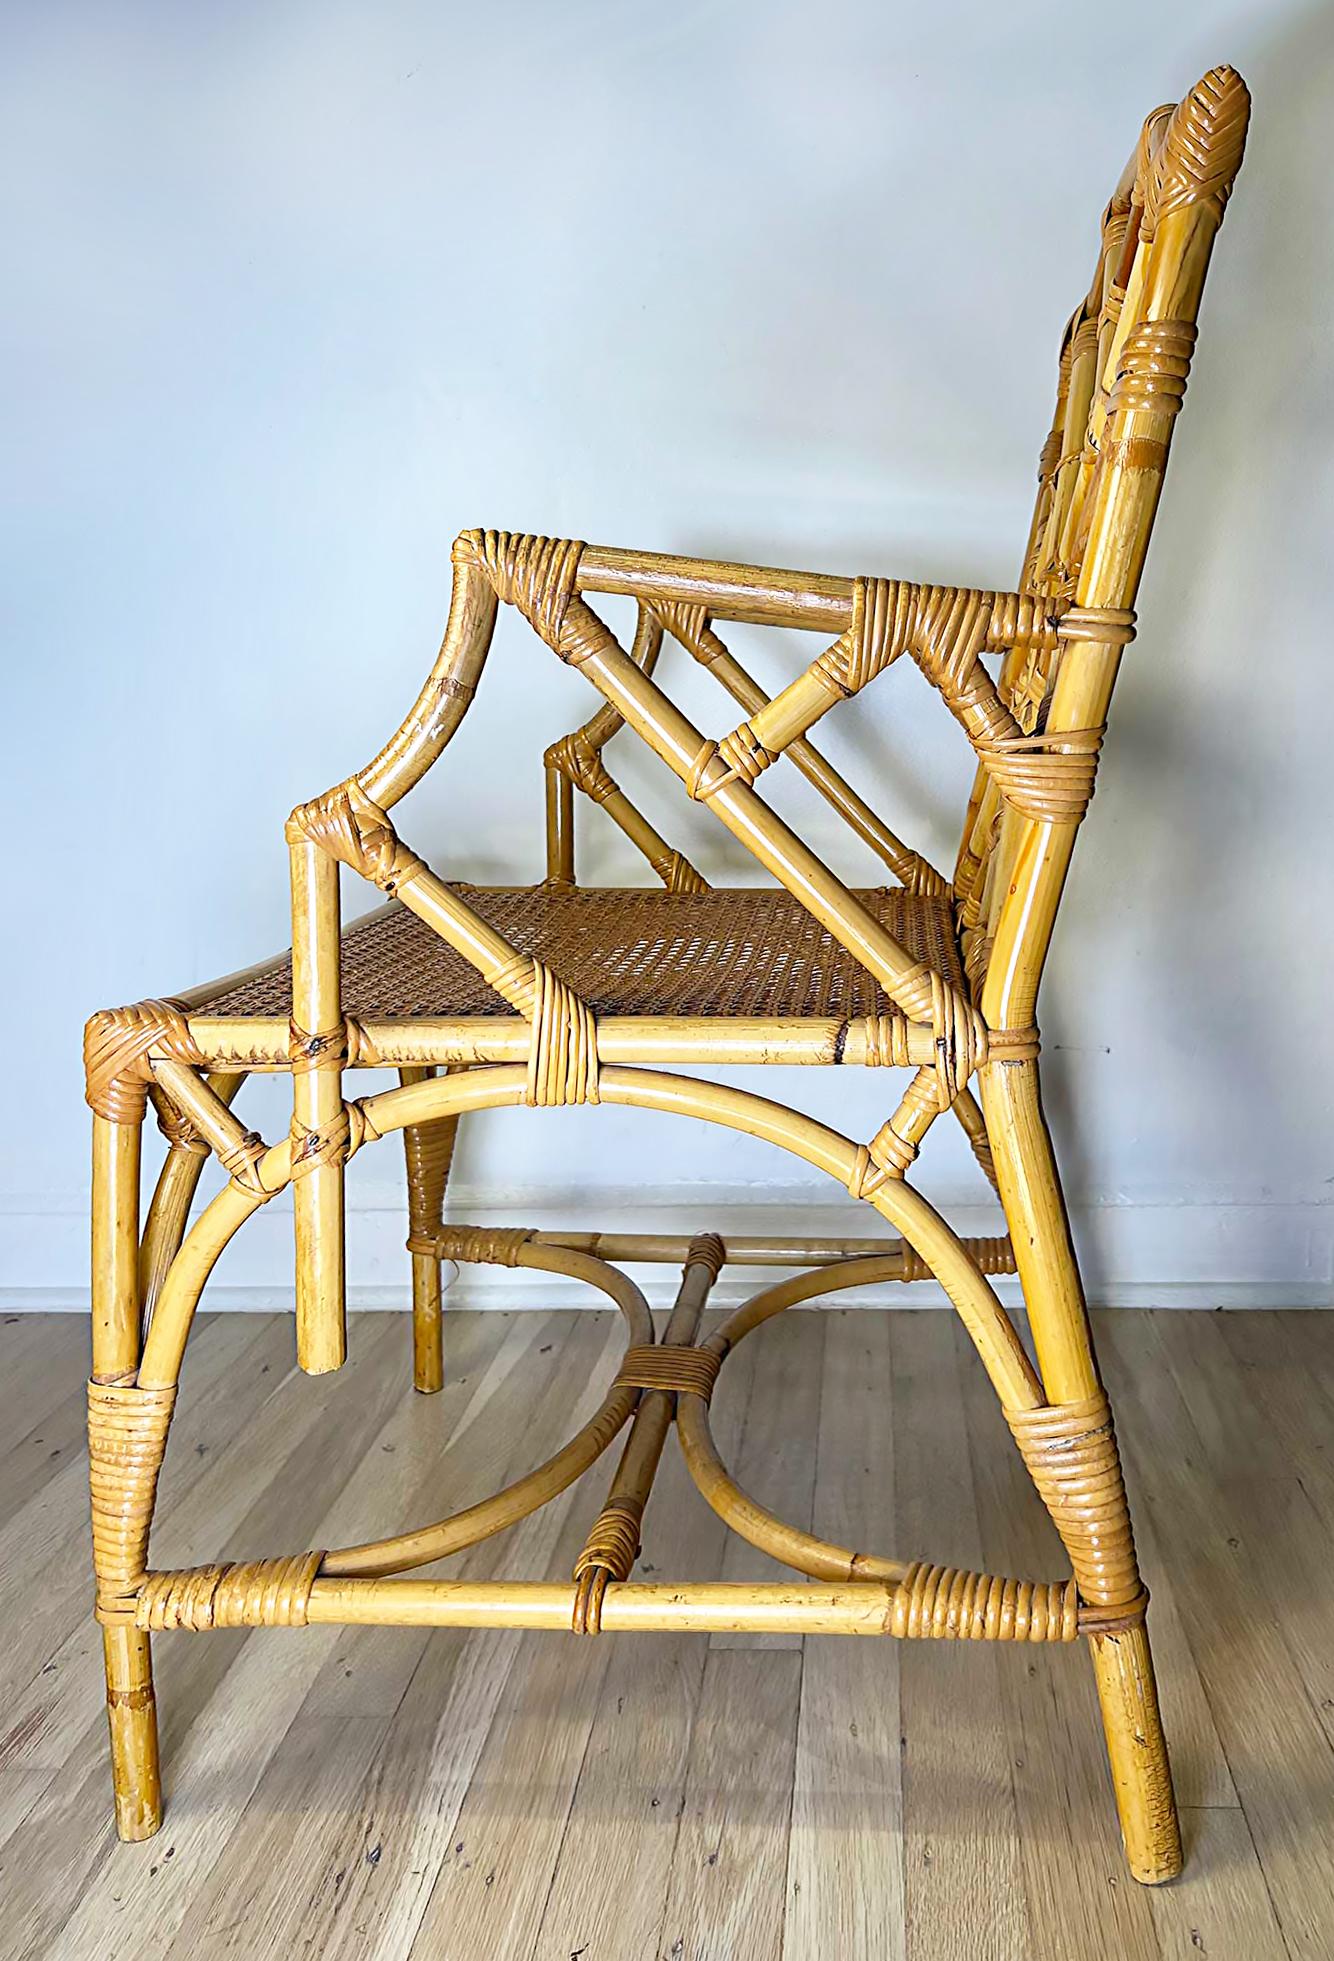 Vintage 1960s Italian Rattan Chinese Chippendale Style Chair

Offered for sale is a 1960s Italian rattan Chinese Chippendale-style chair
created with the Iconic Chinese Chippendale lattice work back. The seat is caned and is in very good original